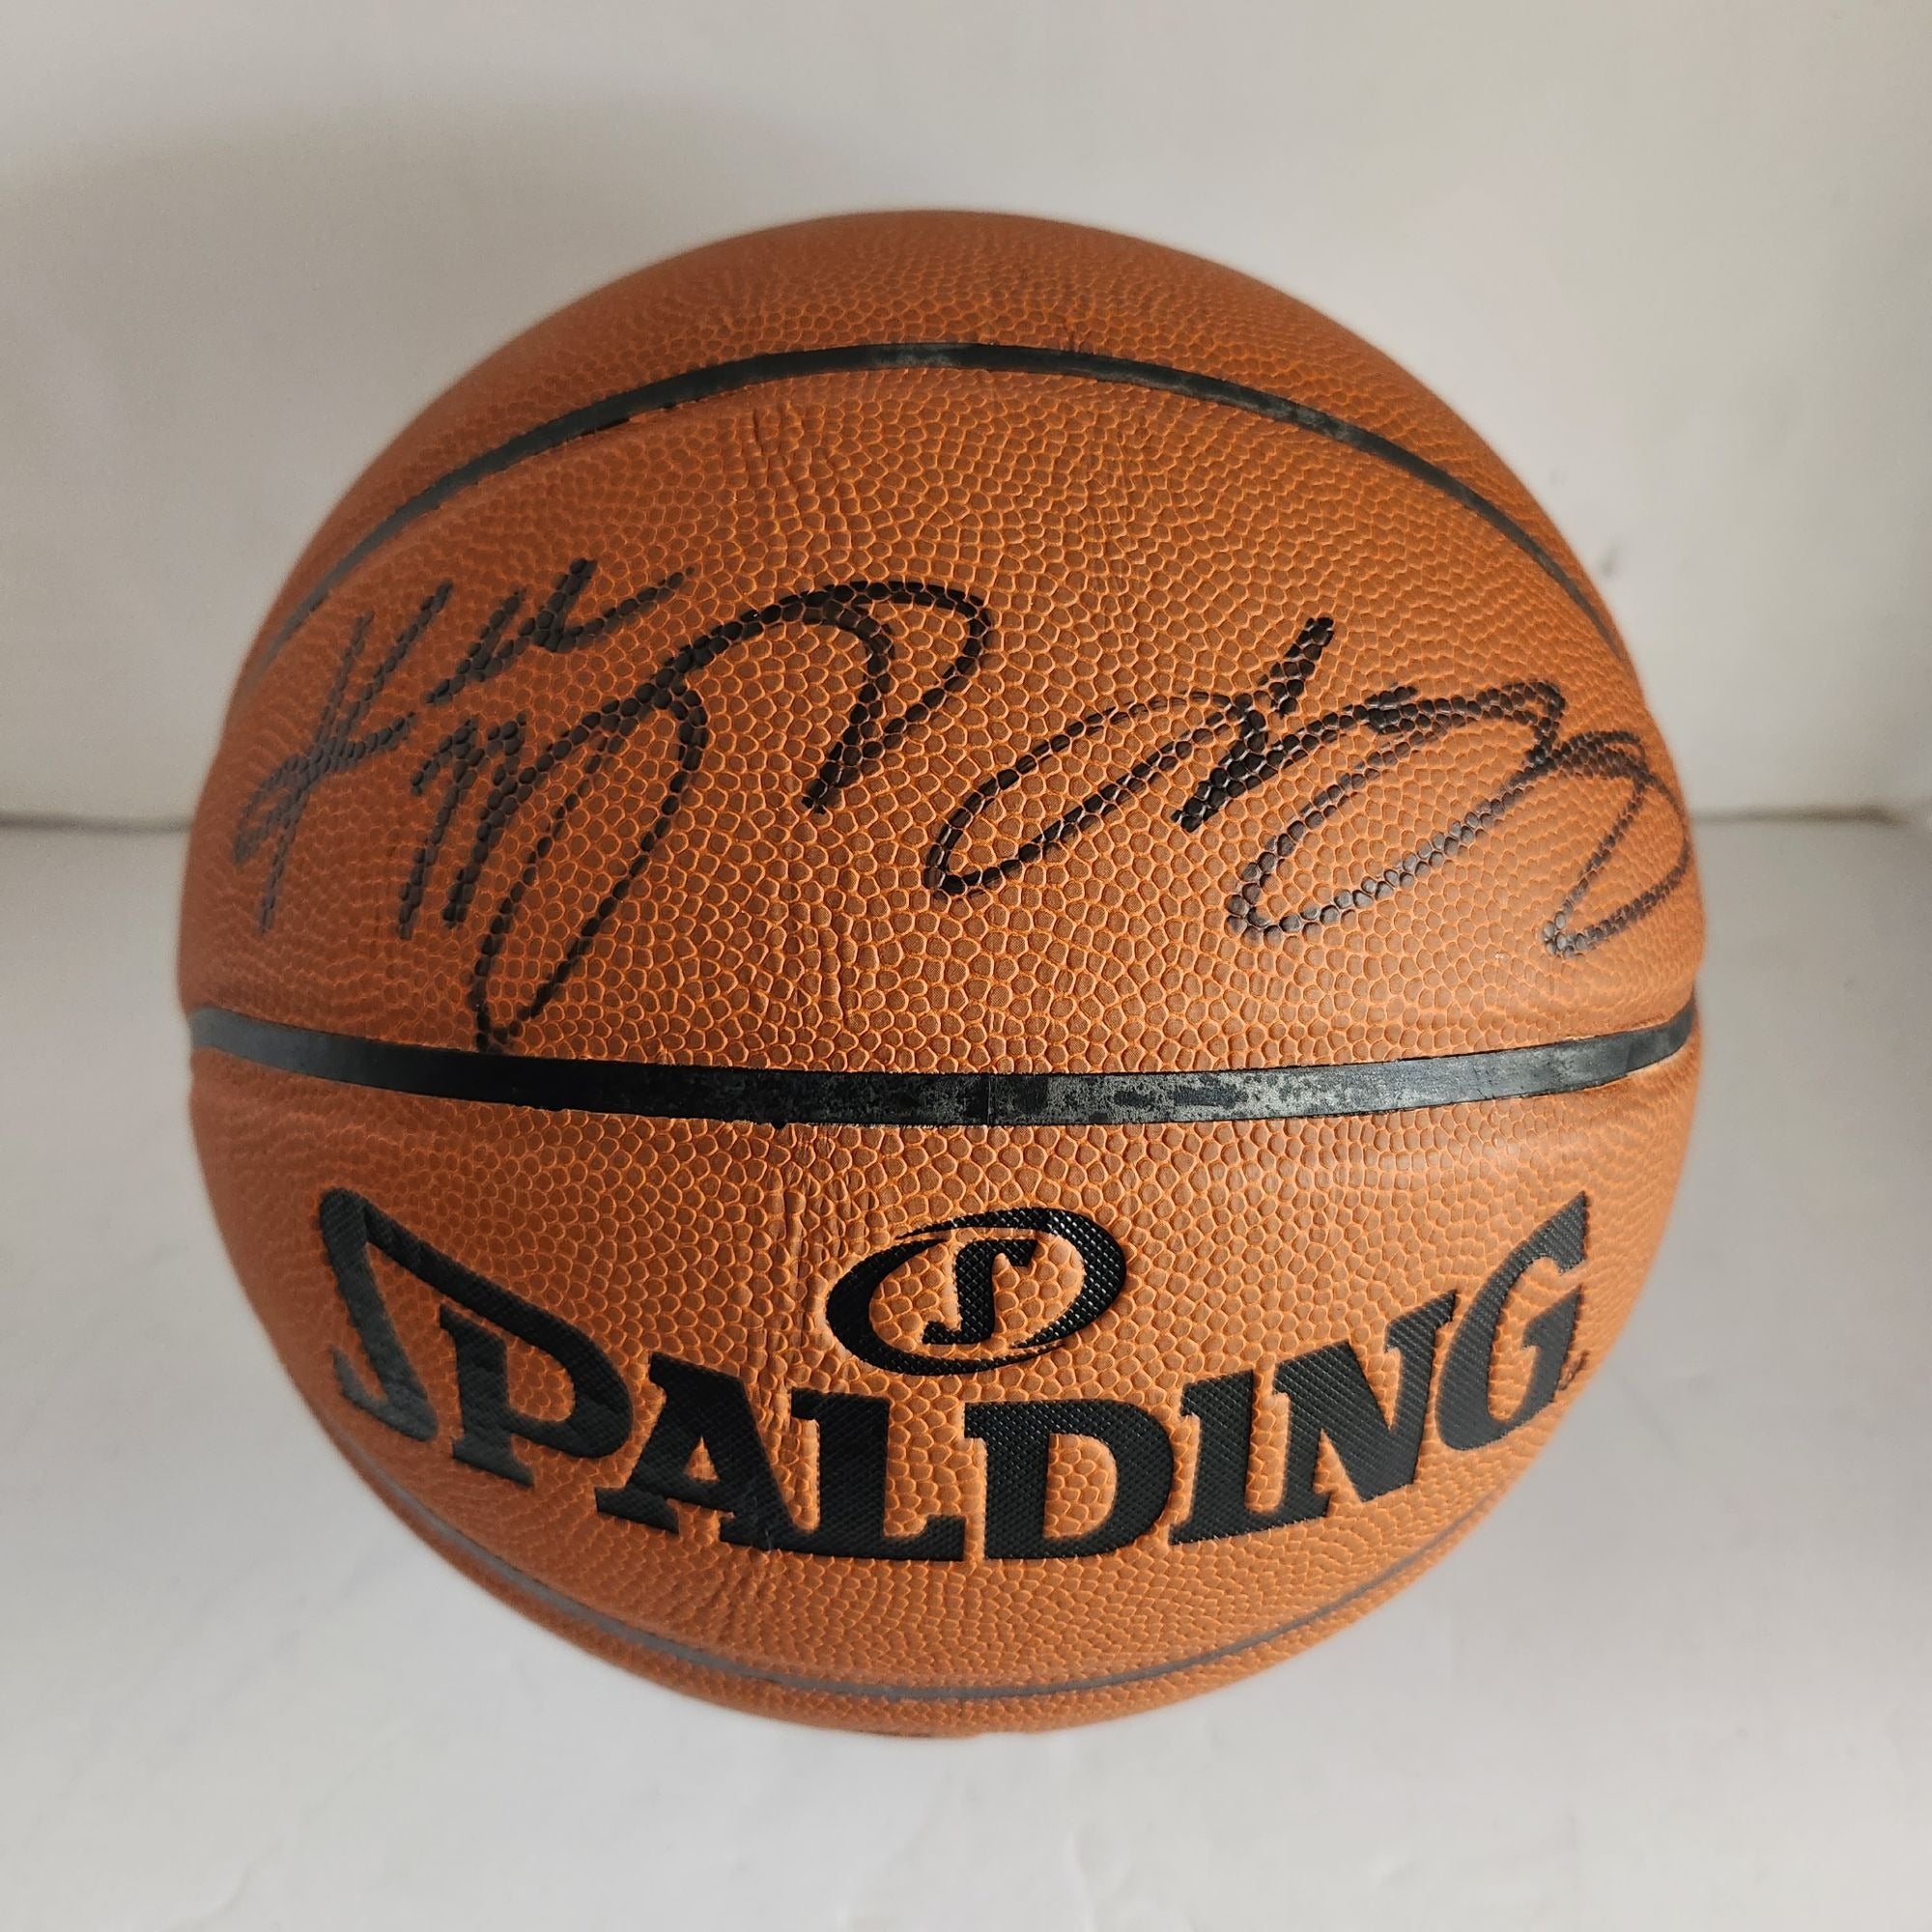 Lebron James and Kobe Bryant game model basketball signed with proof